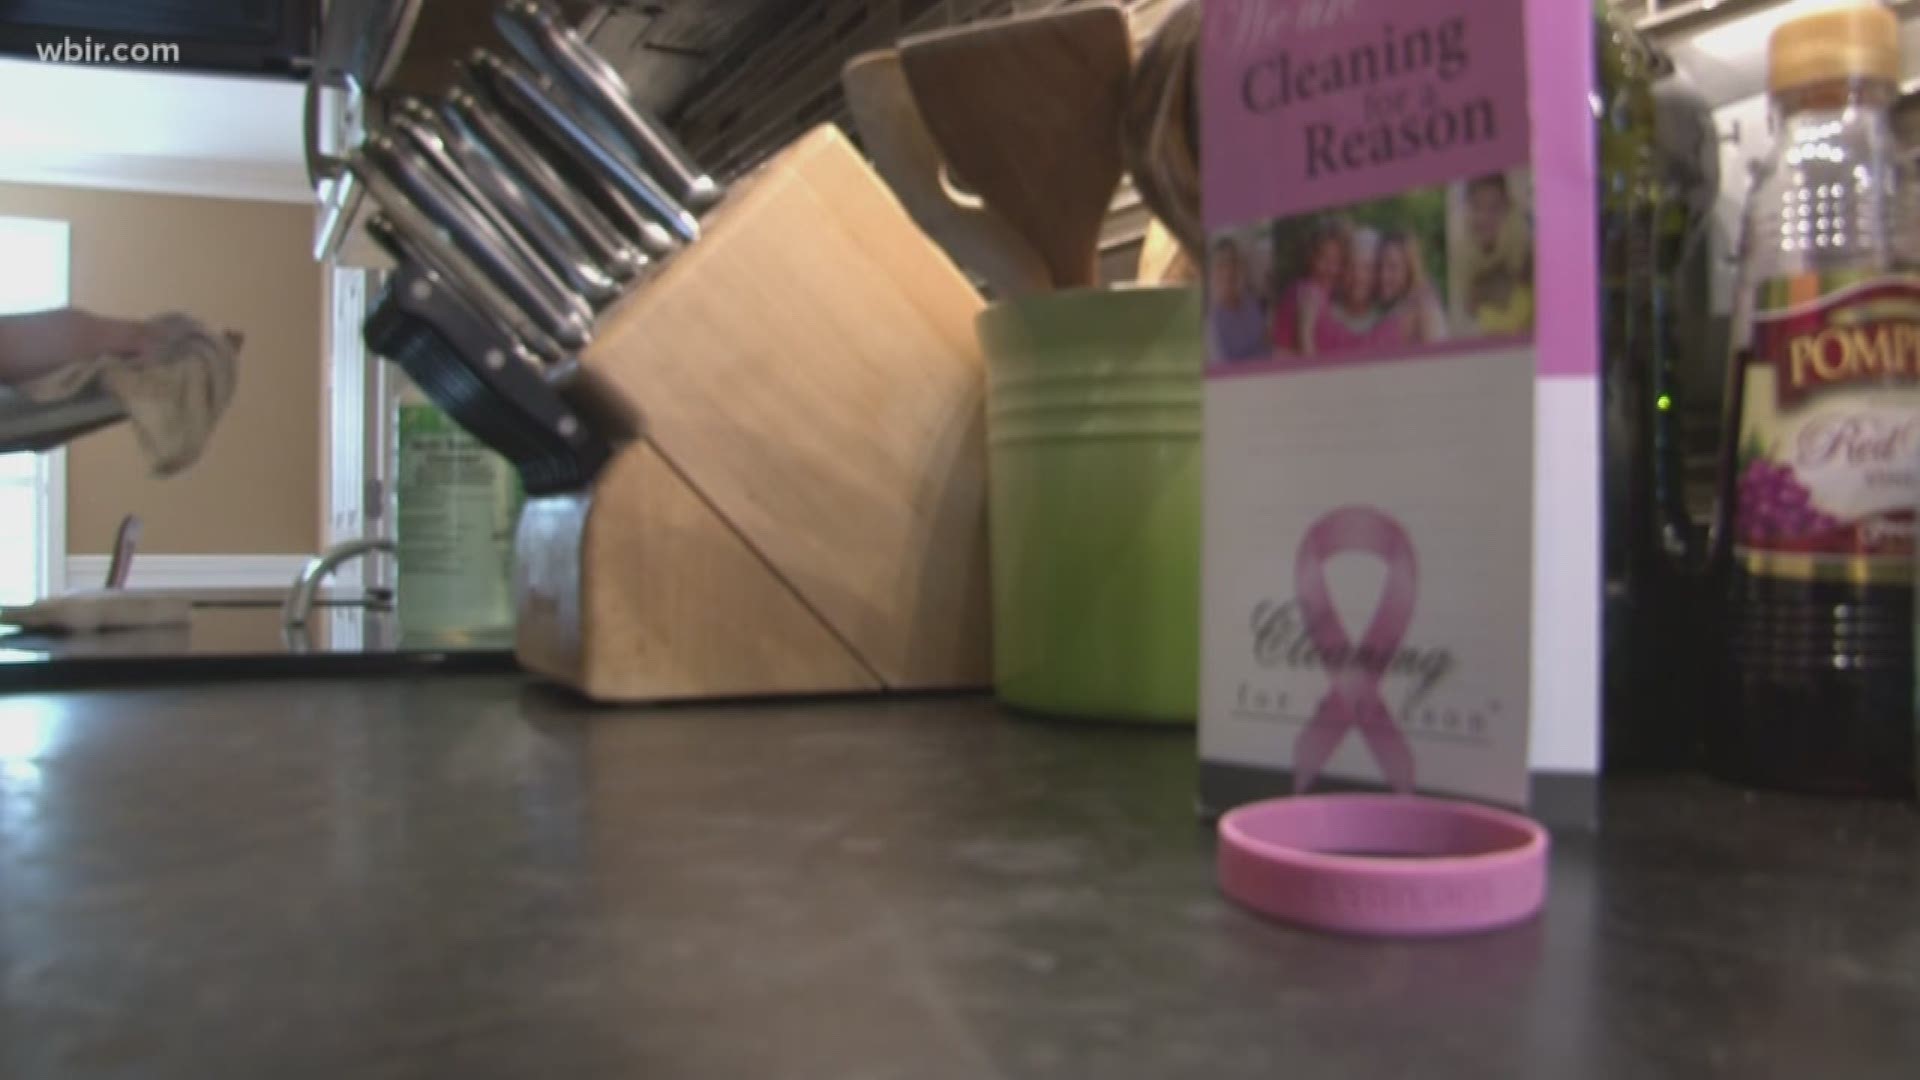 Women currently going through chemotherapy have the option to get a little extra help with their housekeeping through a program called "Cleaning for a Reason."